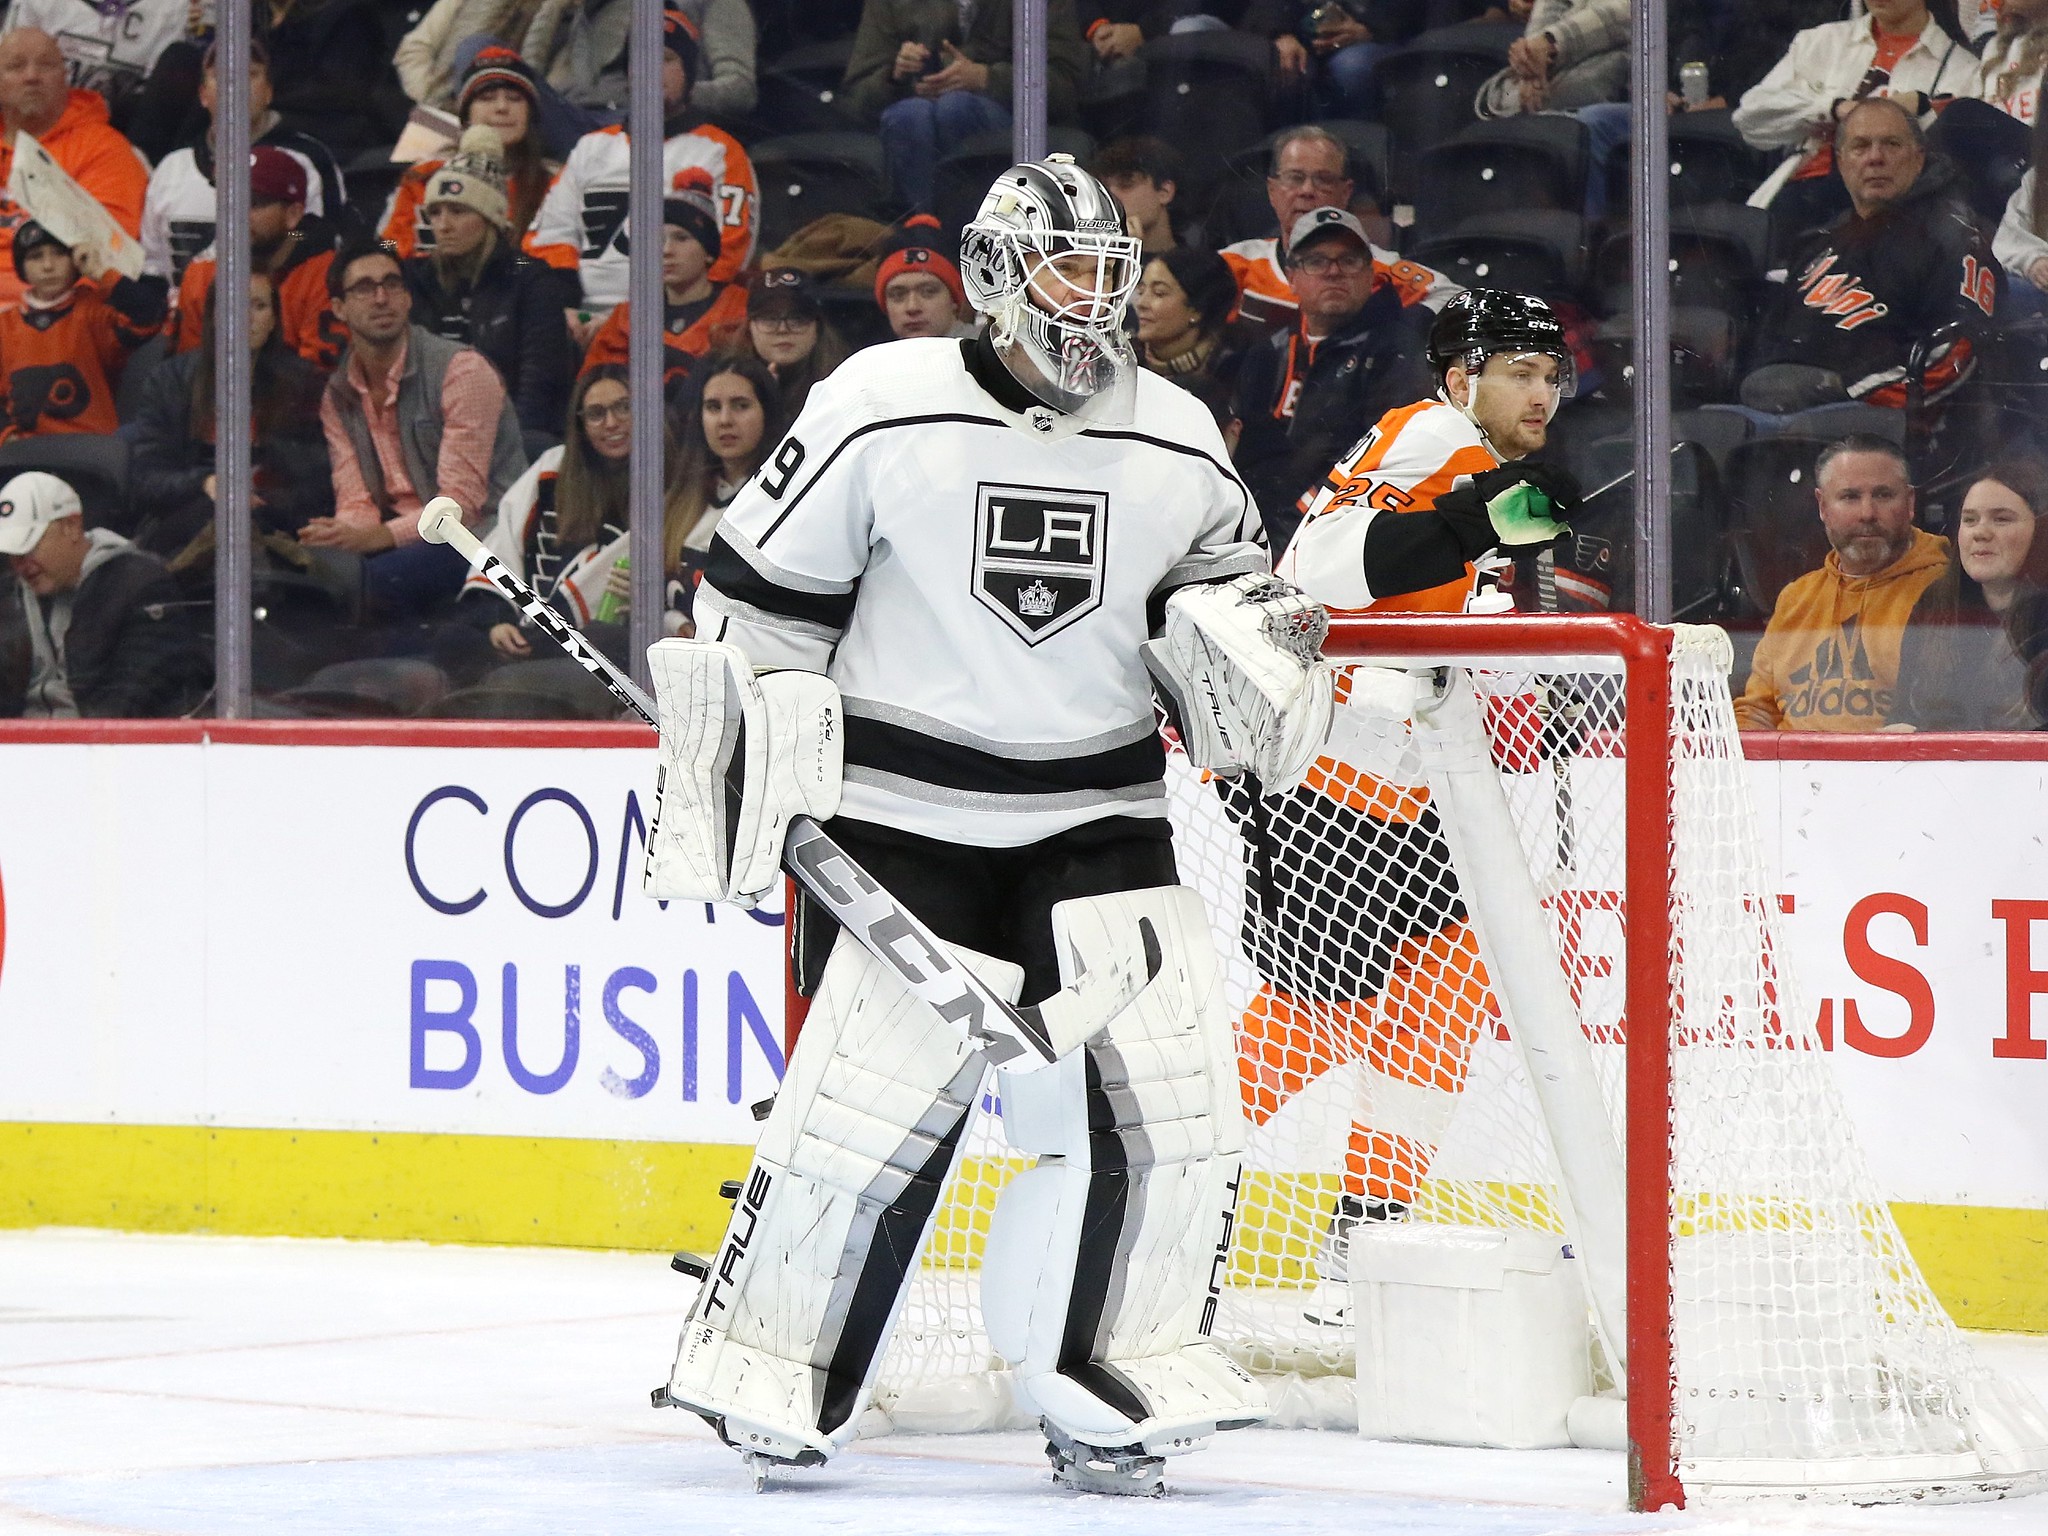 The LA Kings win over the Chicago Blackhawks summed up in one photo